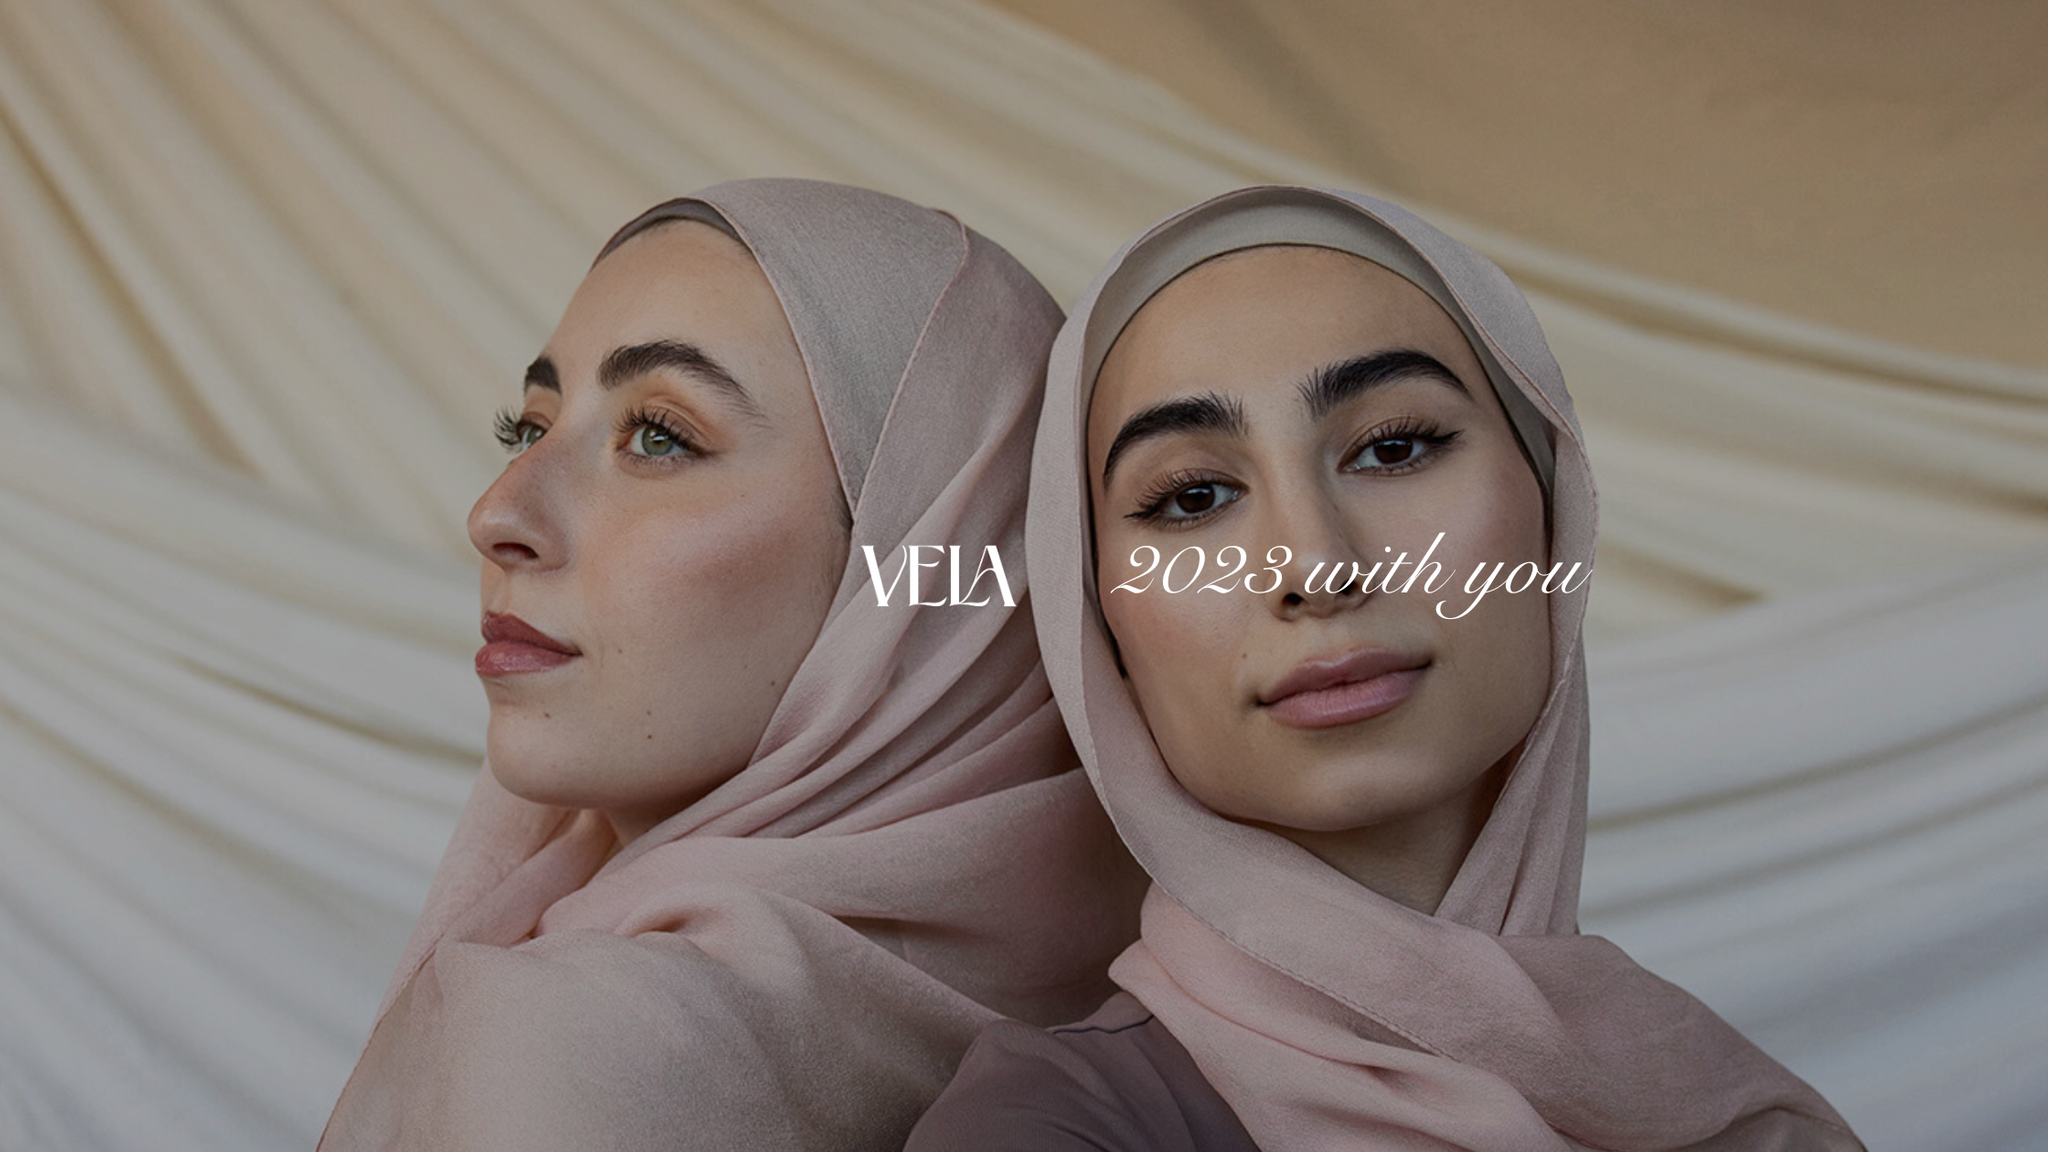 VELA’s 2023 With You: A Blessed New Year